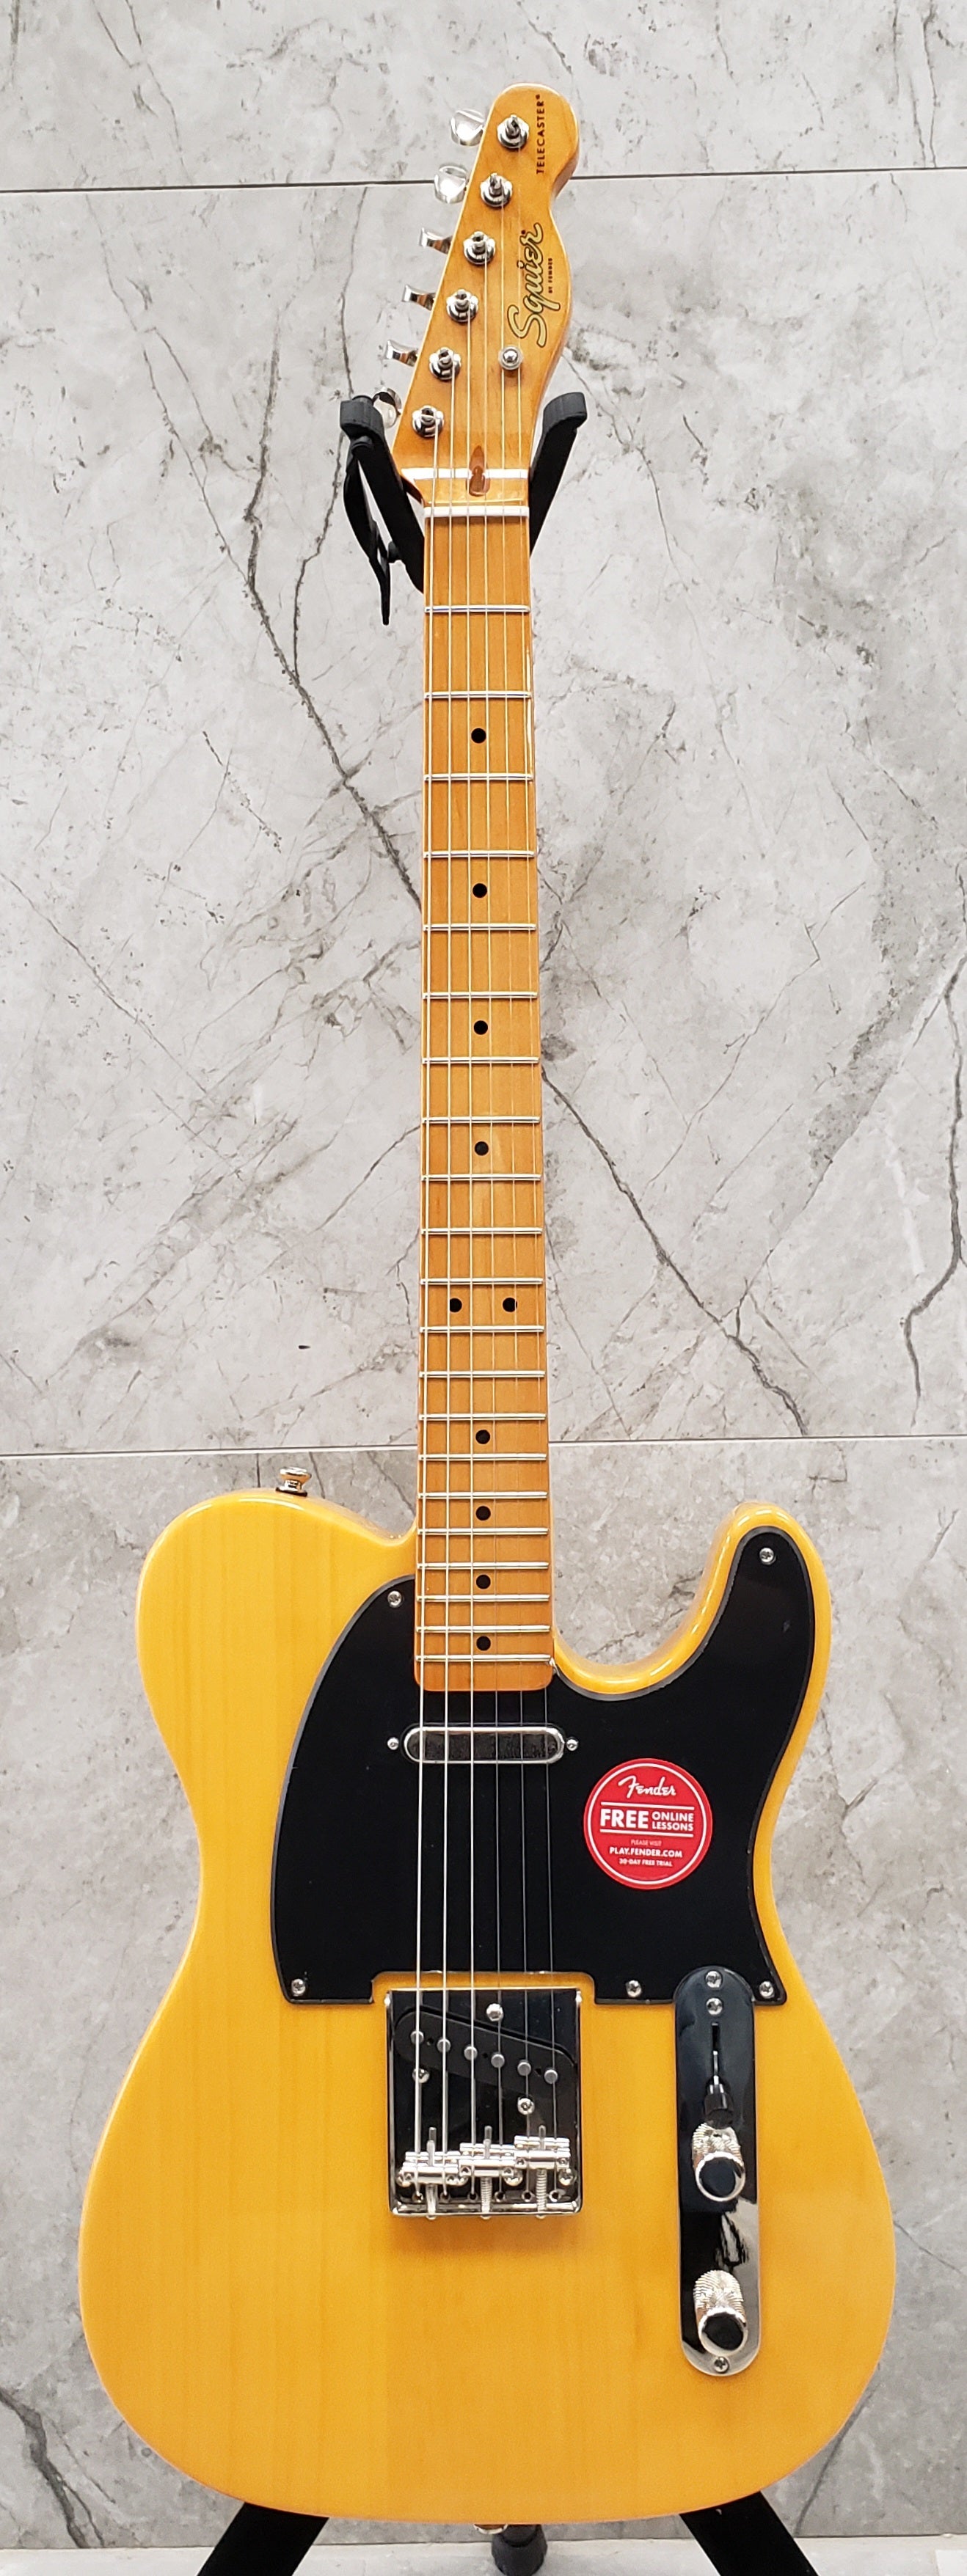 Squier Classic Vibe 50s Telecaster Maple Fingerboard Butterscotch Blonde 0374030550 SERIAL NUMBER ISSJ21000761 - 8.6 LBS